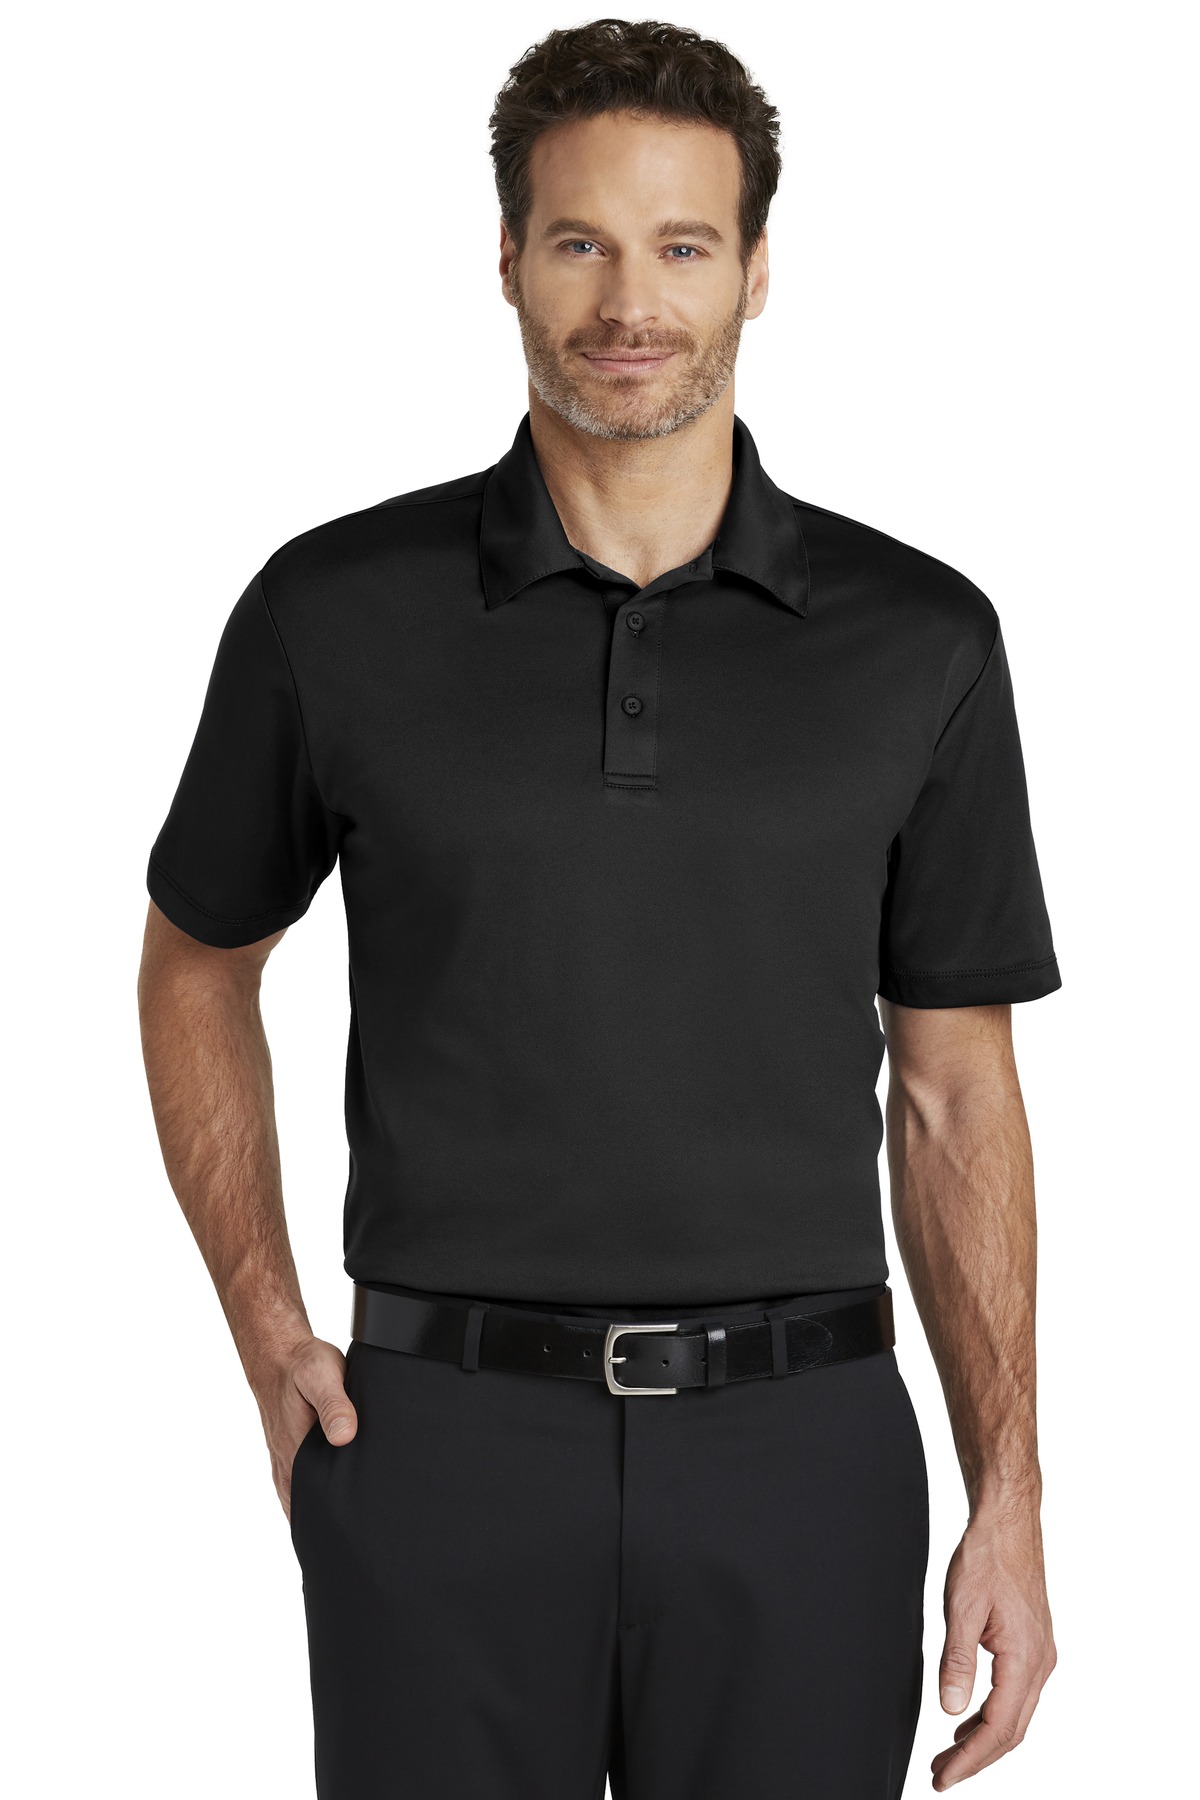 Port Authority Hospitality Polos & Knits ® Silk Touch Performance Polo.-Port Authority